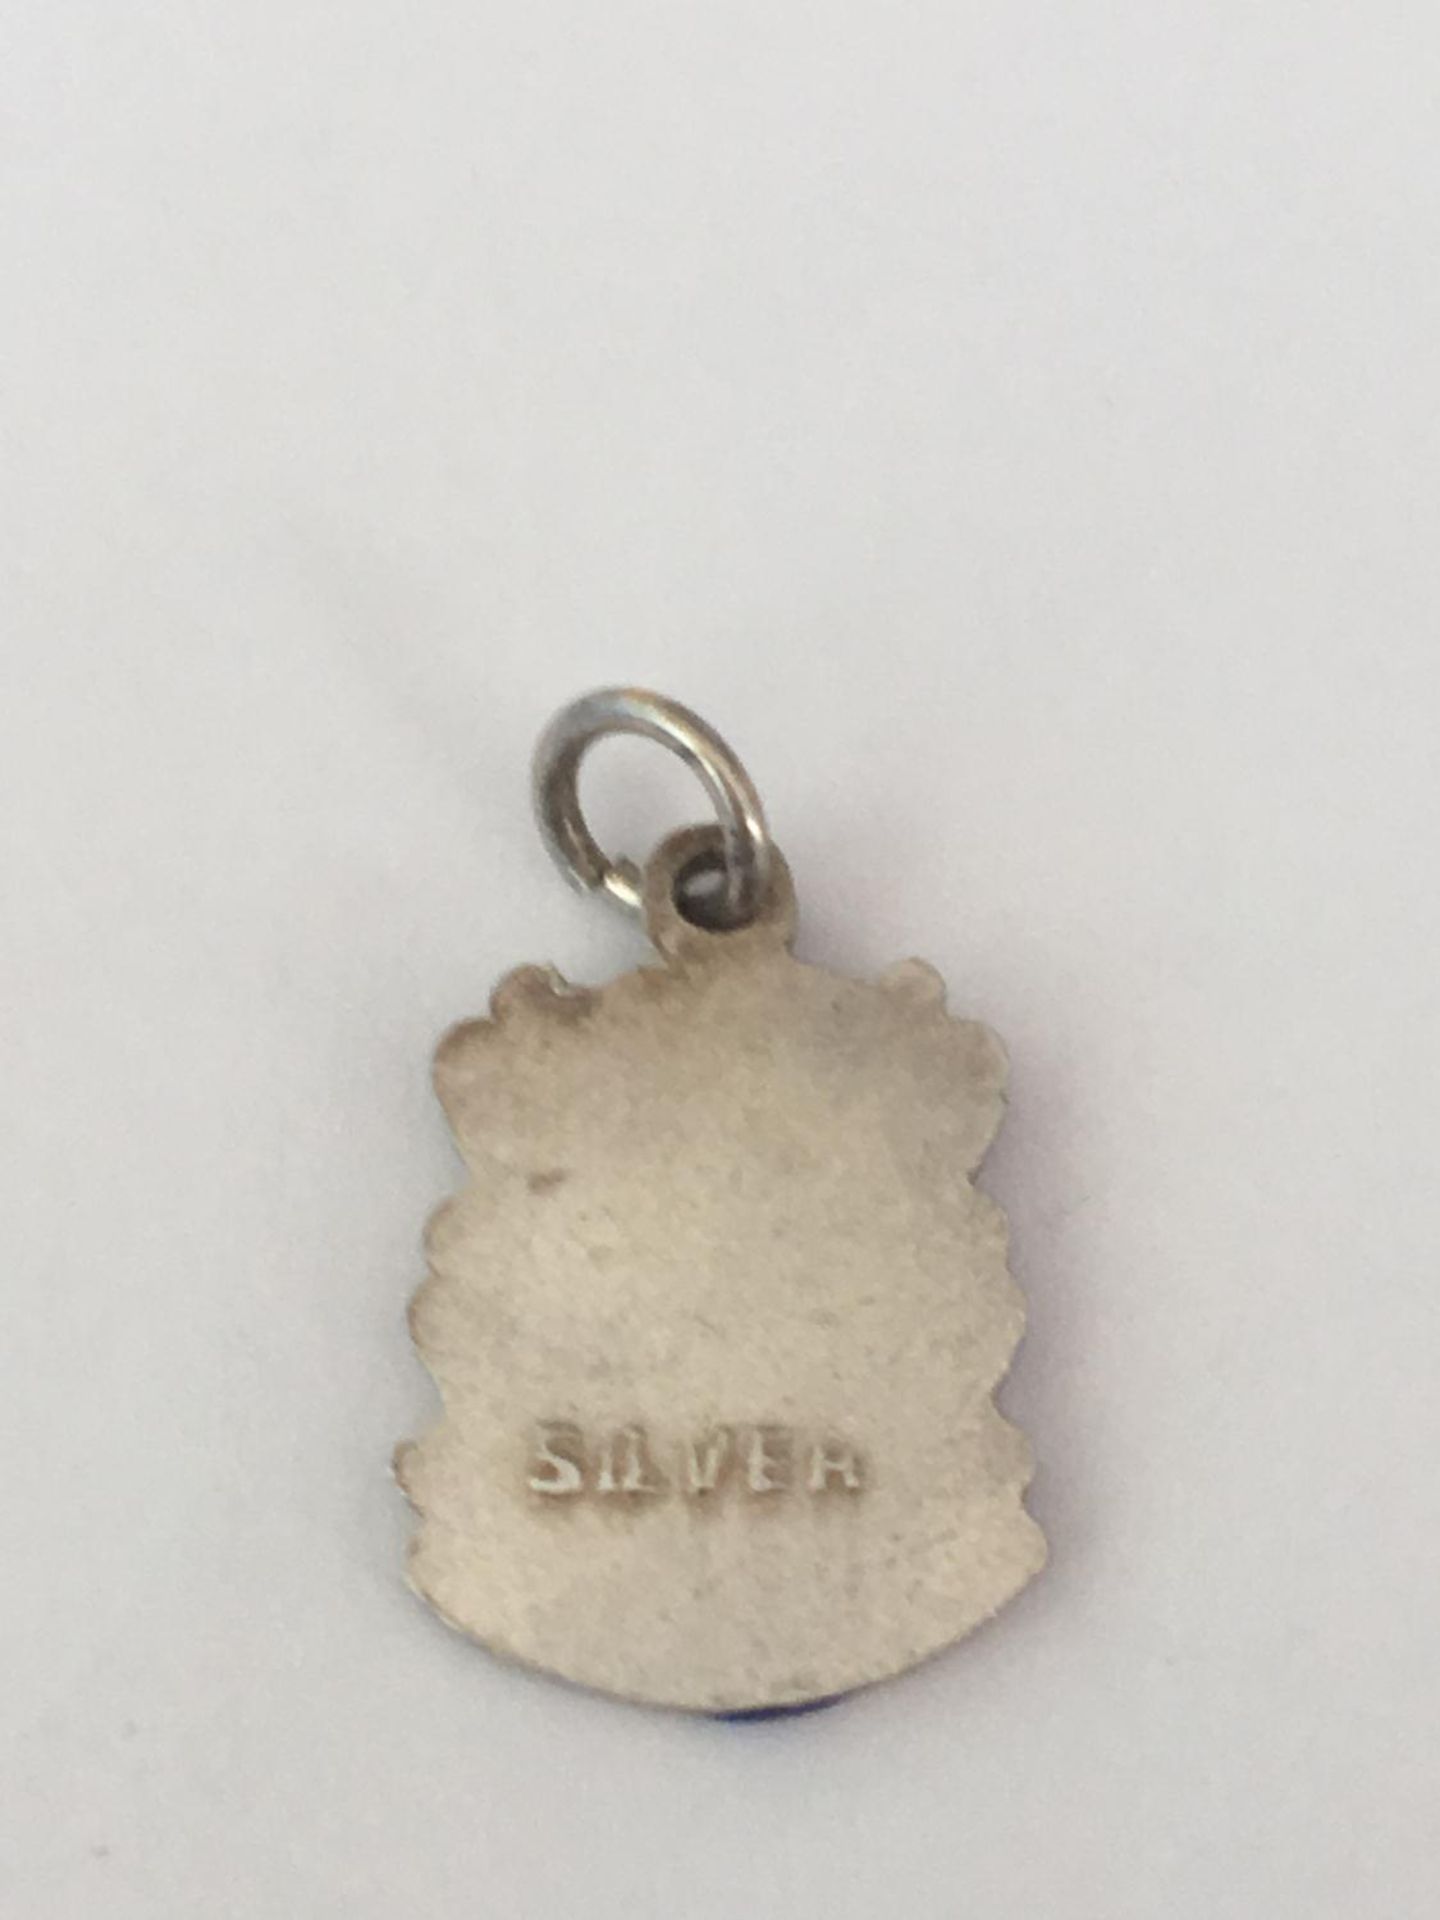 Small enamelled Canterbury silver fob - Image 2 of 2